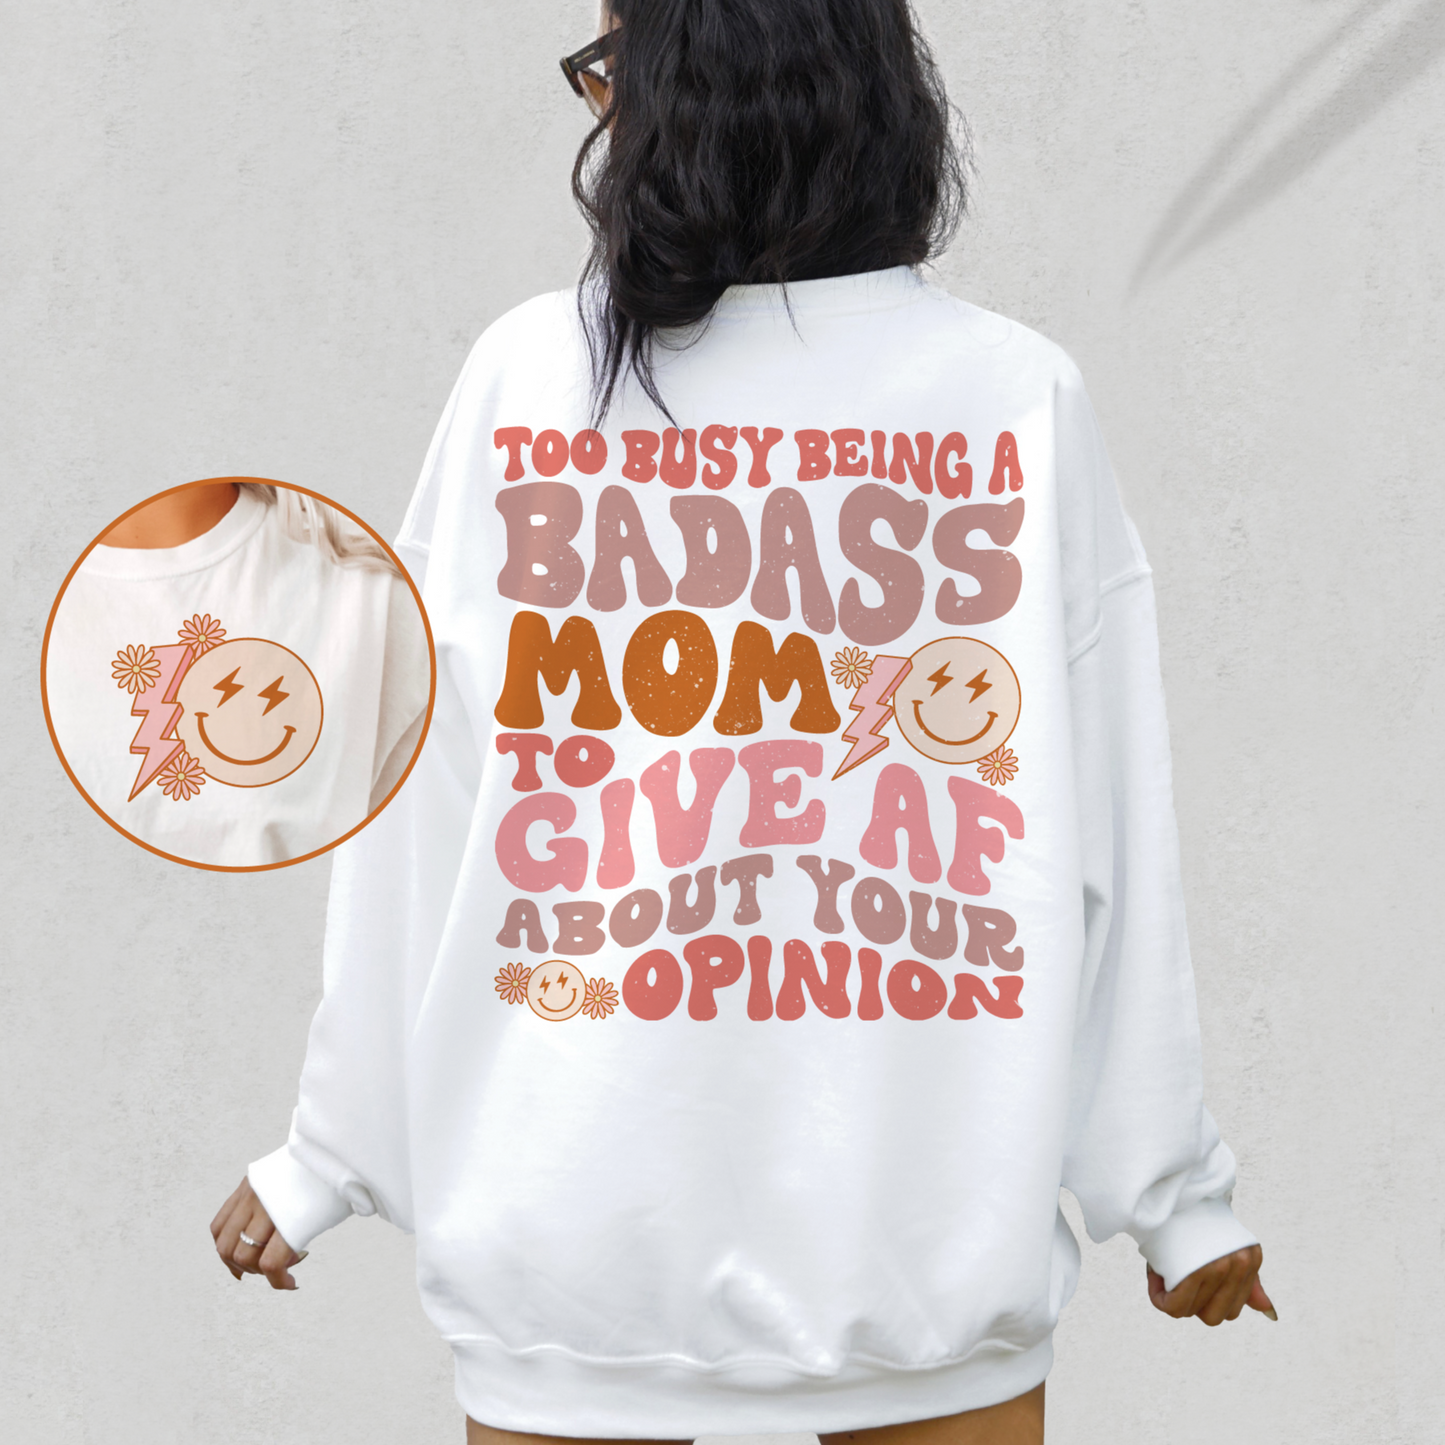 Too Busy Being a Badass Mom SVG PNG | Mother's Day Sublimation | Retro shirt Design